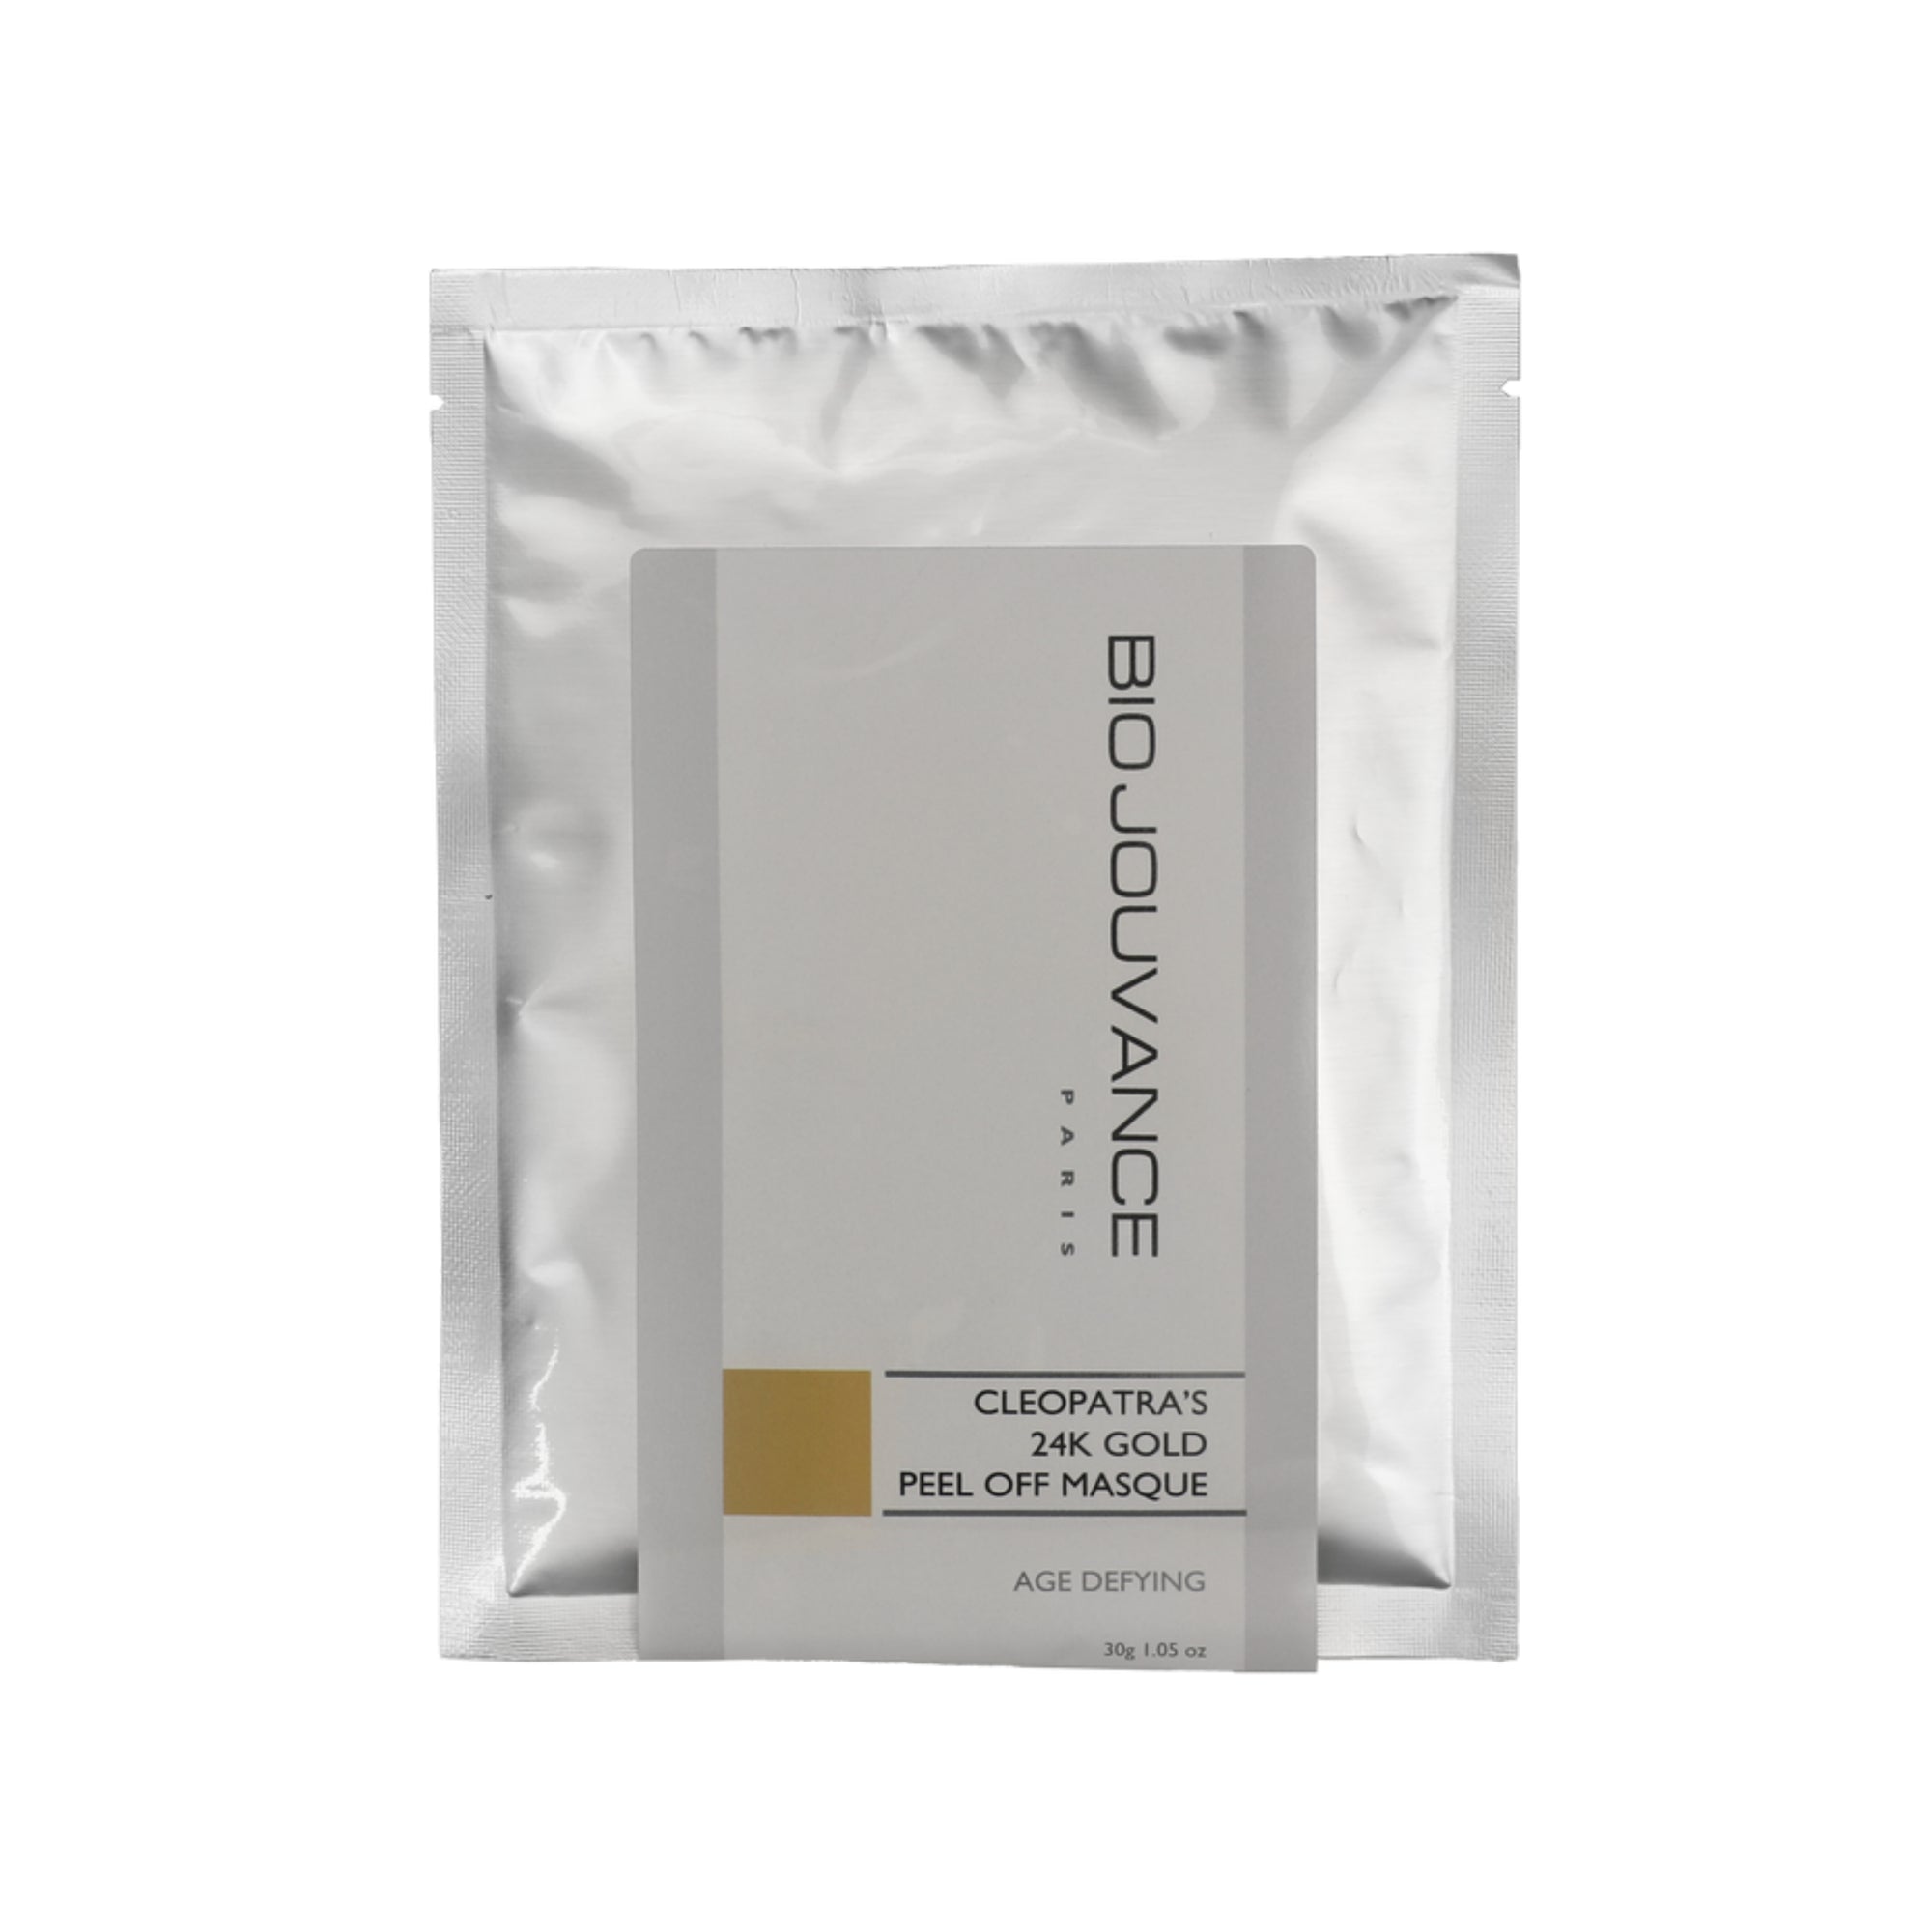 BioJouvance Paris Cleopatra's 24K Gold Peel Off Mask for Mature and Dry Skin